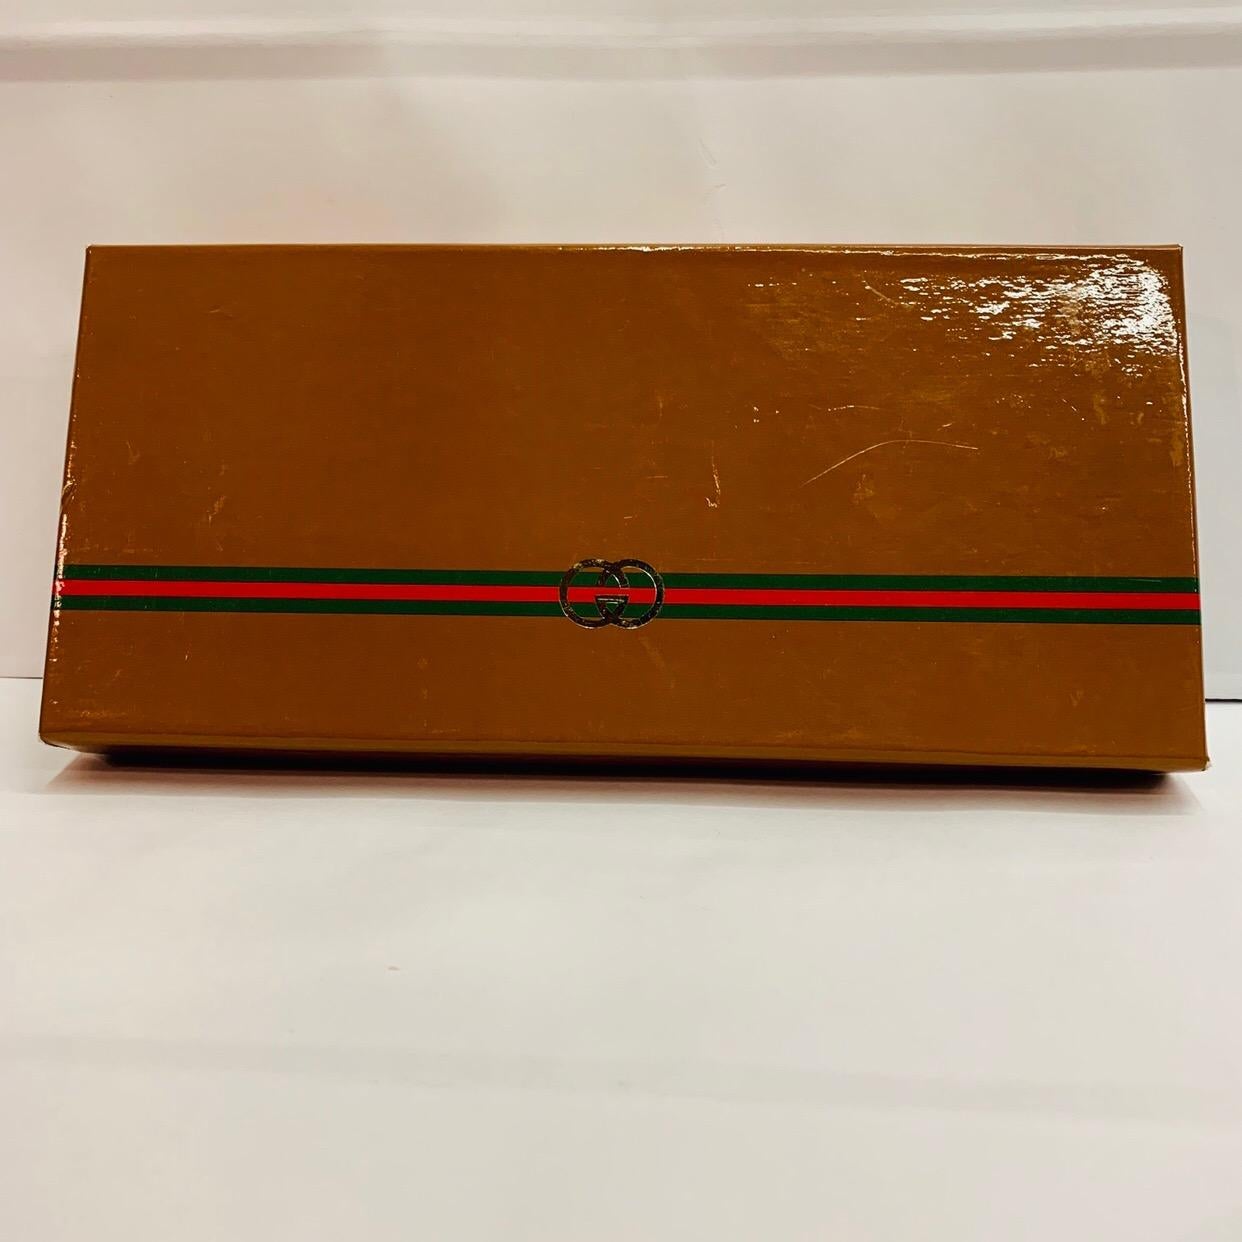 GUCCI Never used authentic vintage playing cards with original box as shown.
